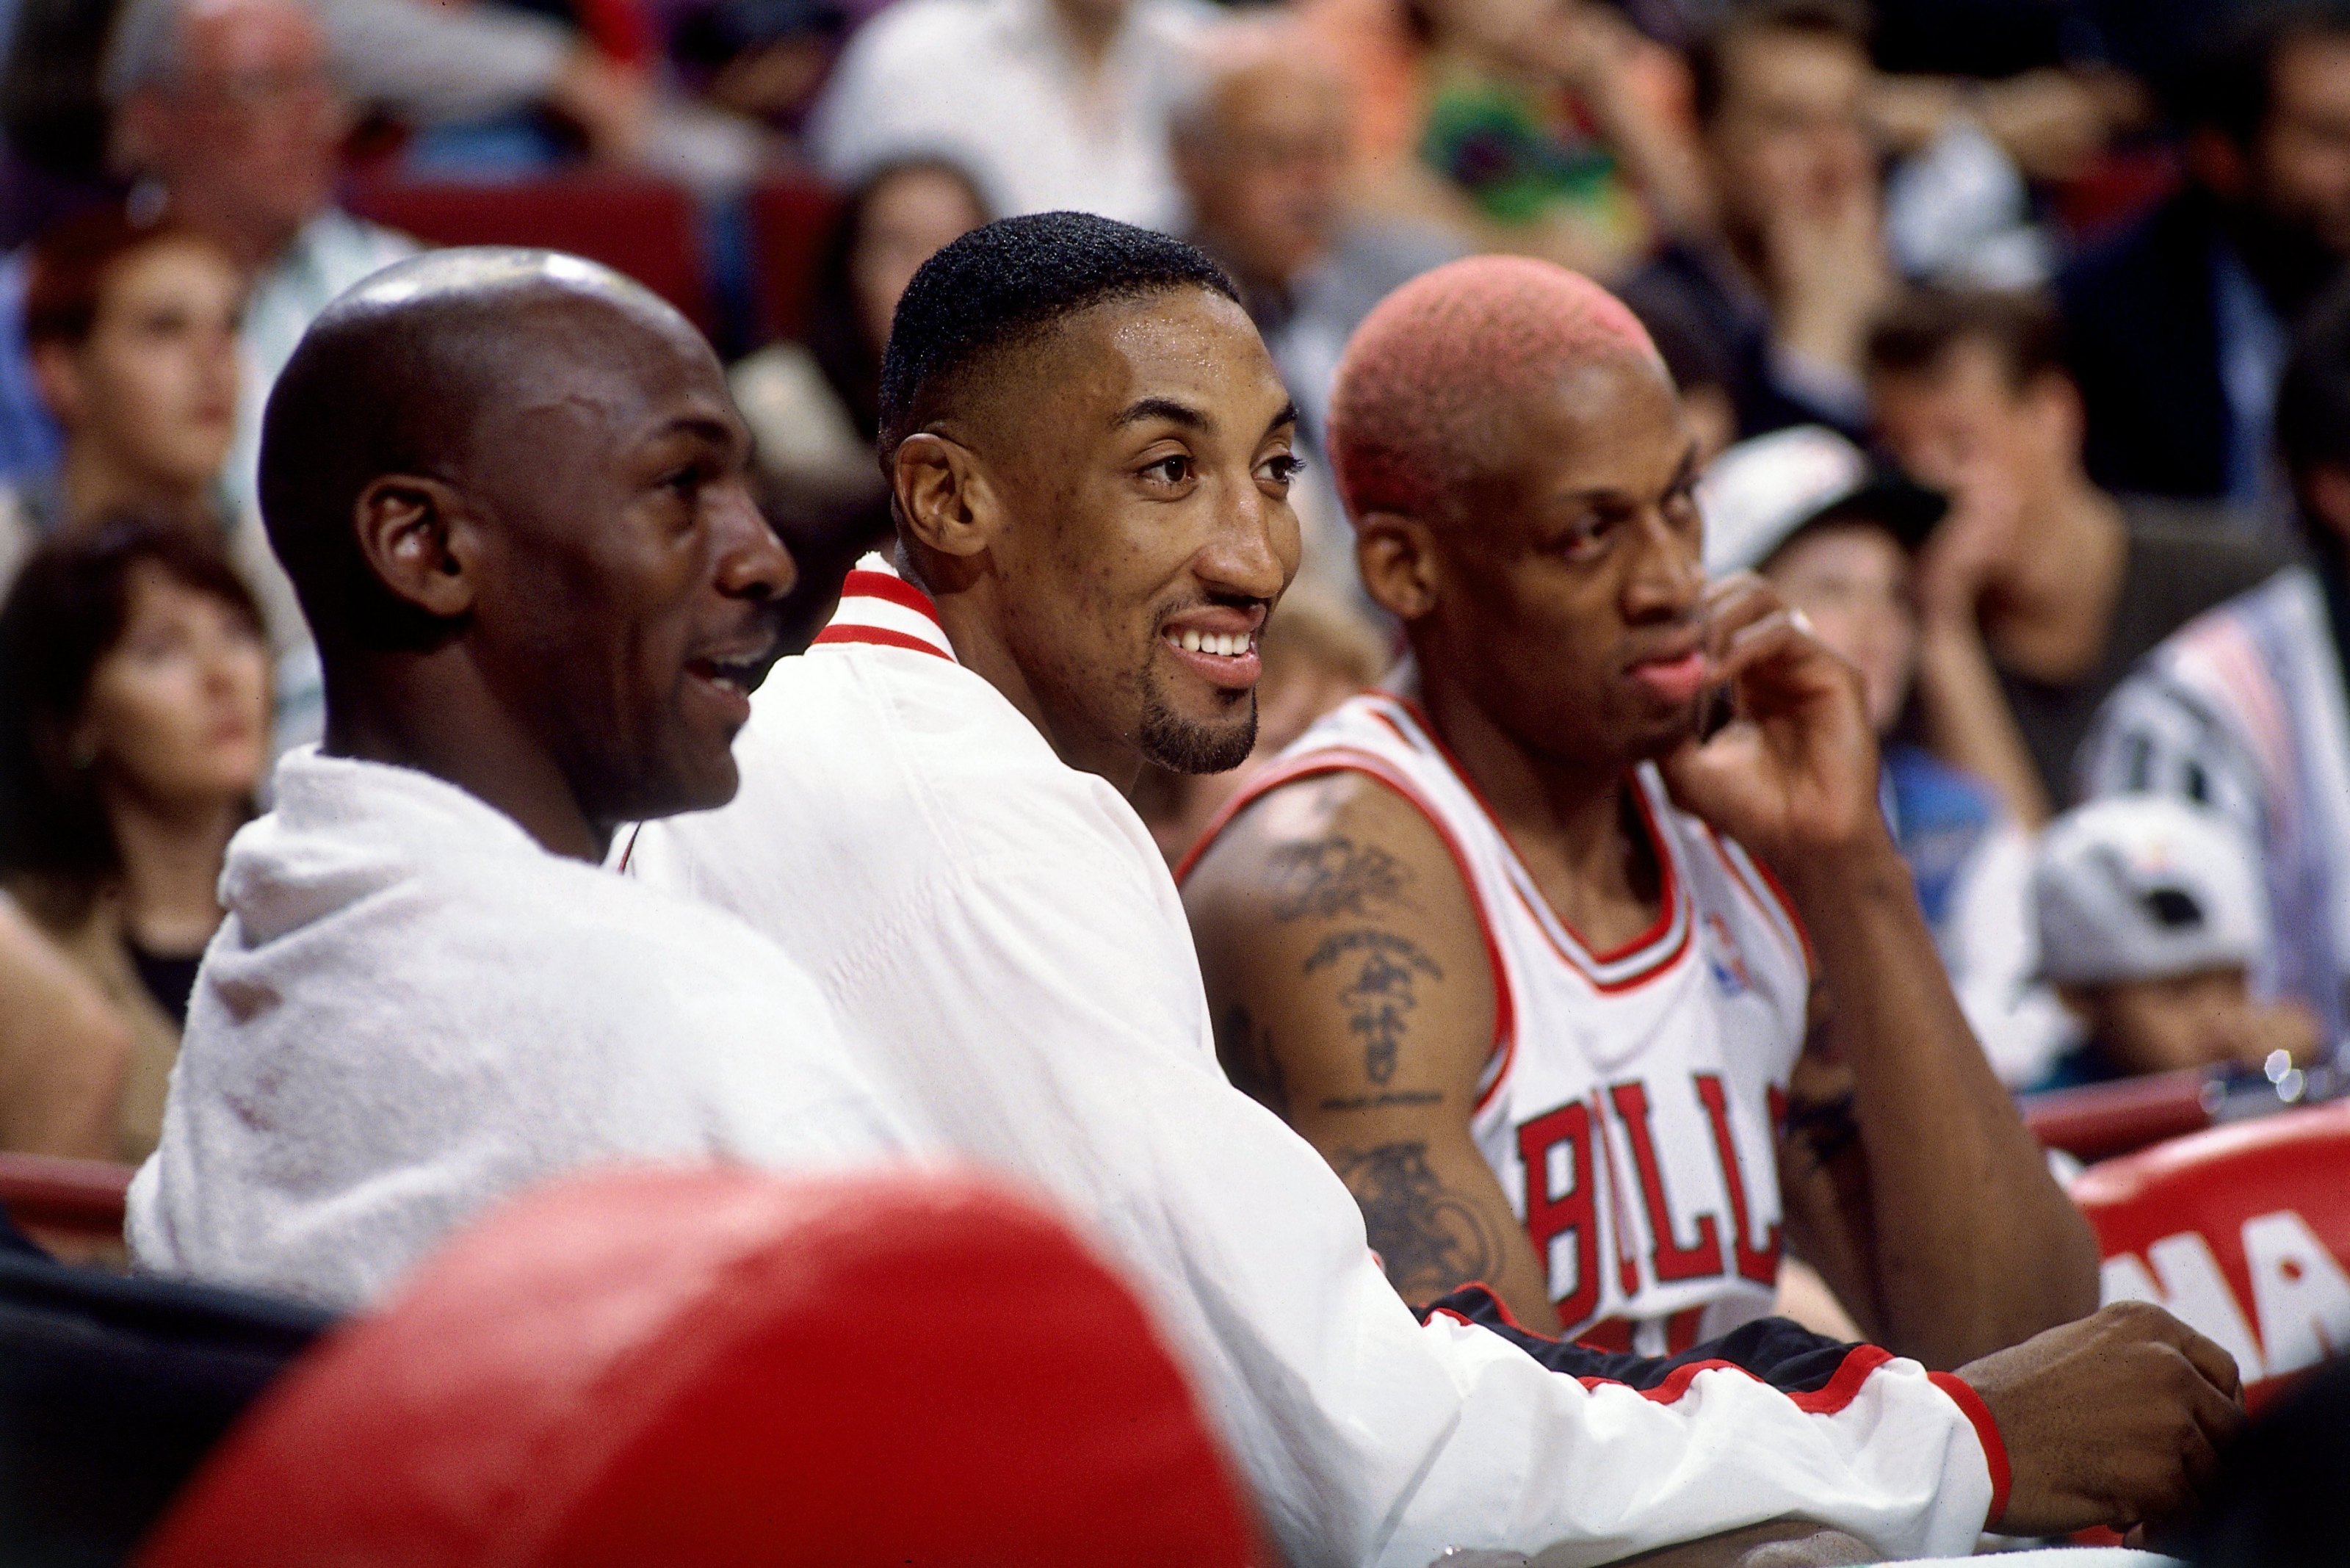 The Chicago Bulls' Dennis Rodman during Game 3 of a first-round